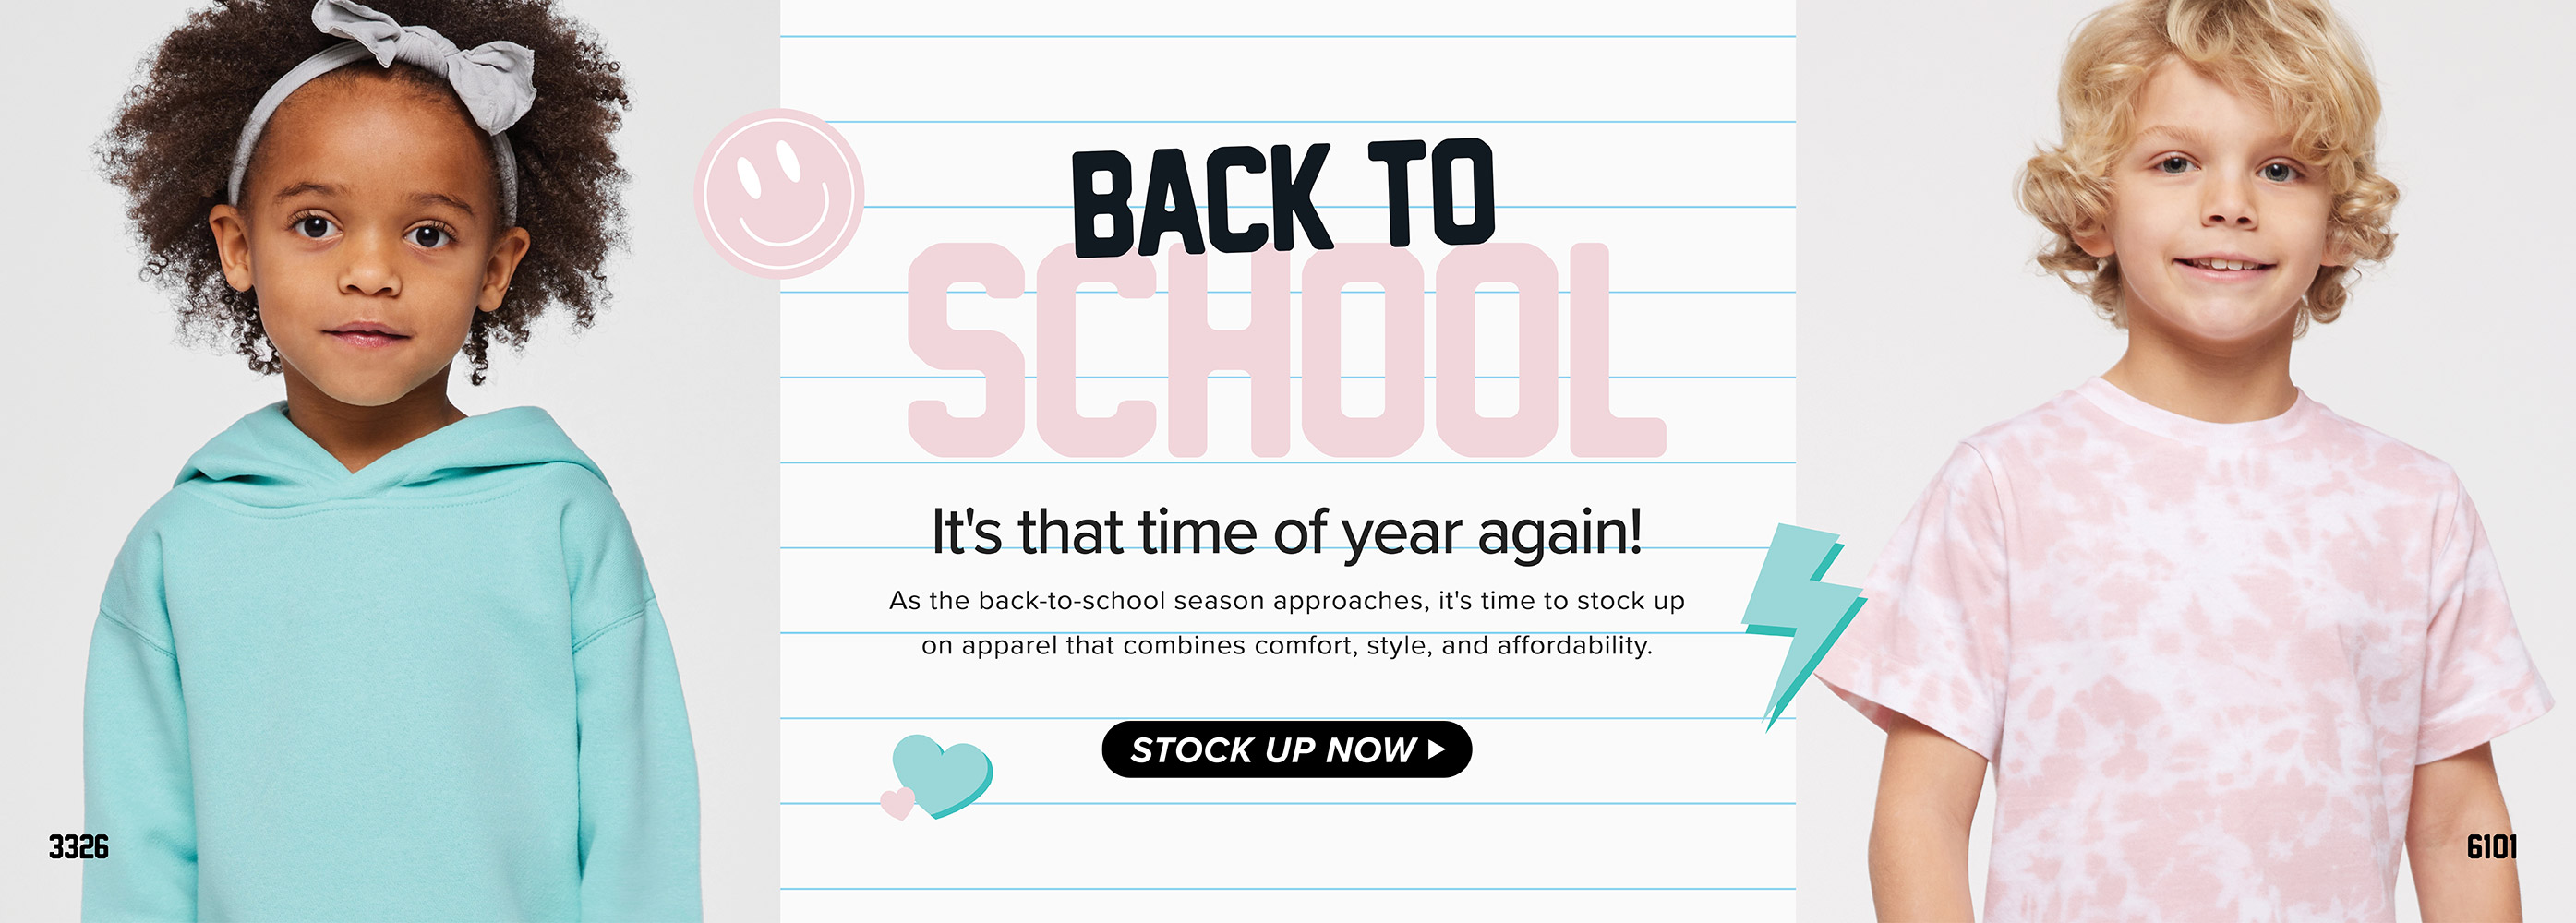 Back to School Styles:  3326 & 6101